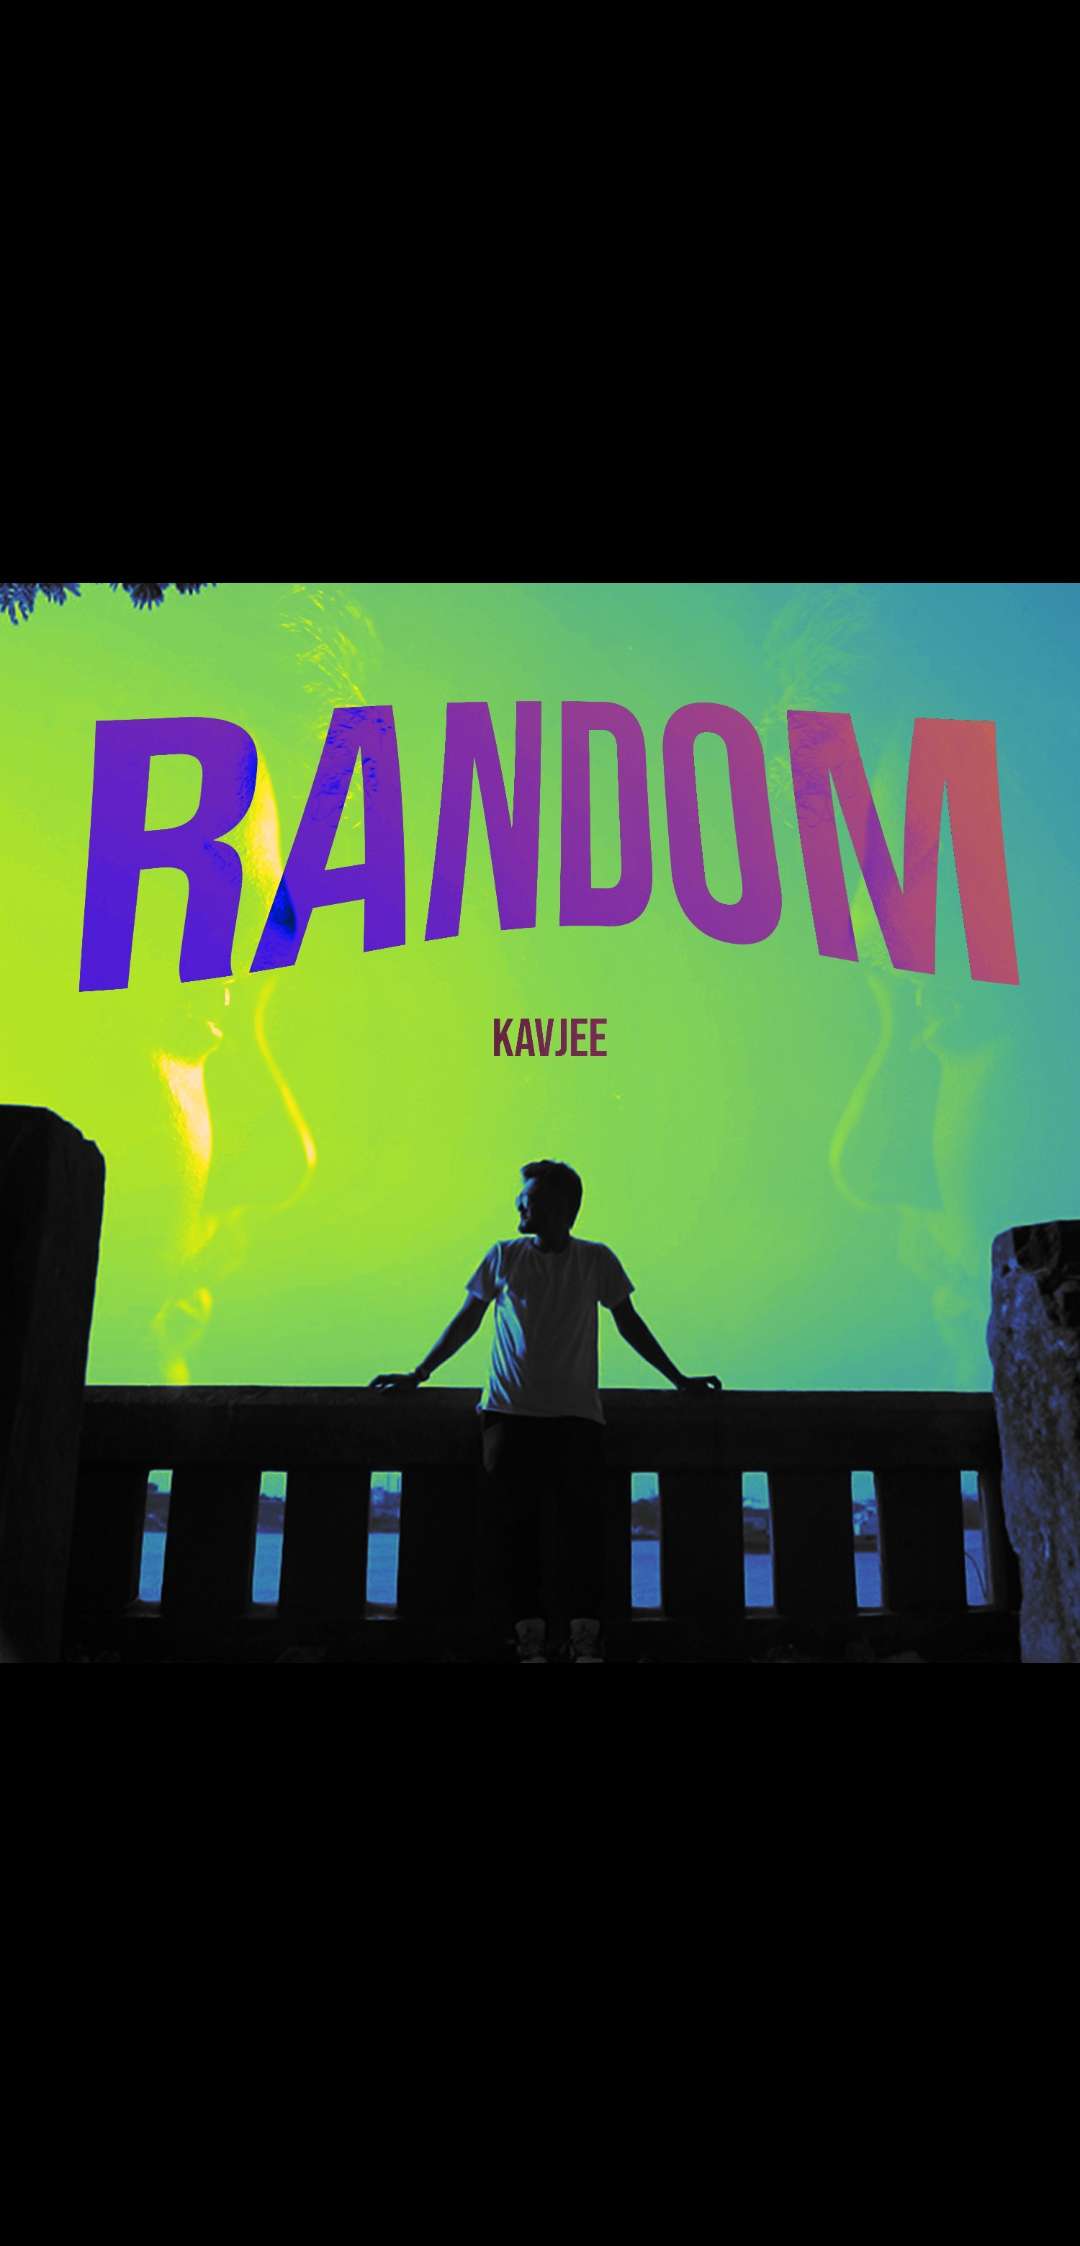 Kavjee’s latest single “Random” is an oldschool Boombap Bengali – English mix rapsong, that will set the BPM on fire.